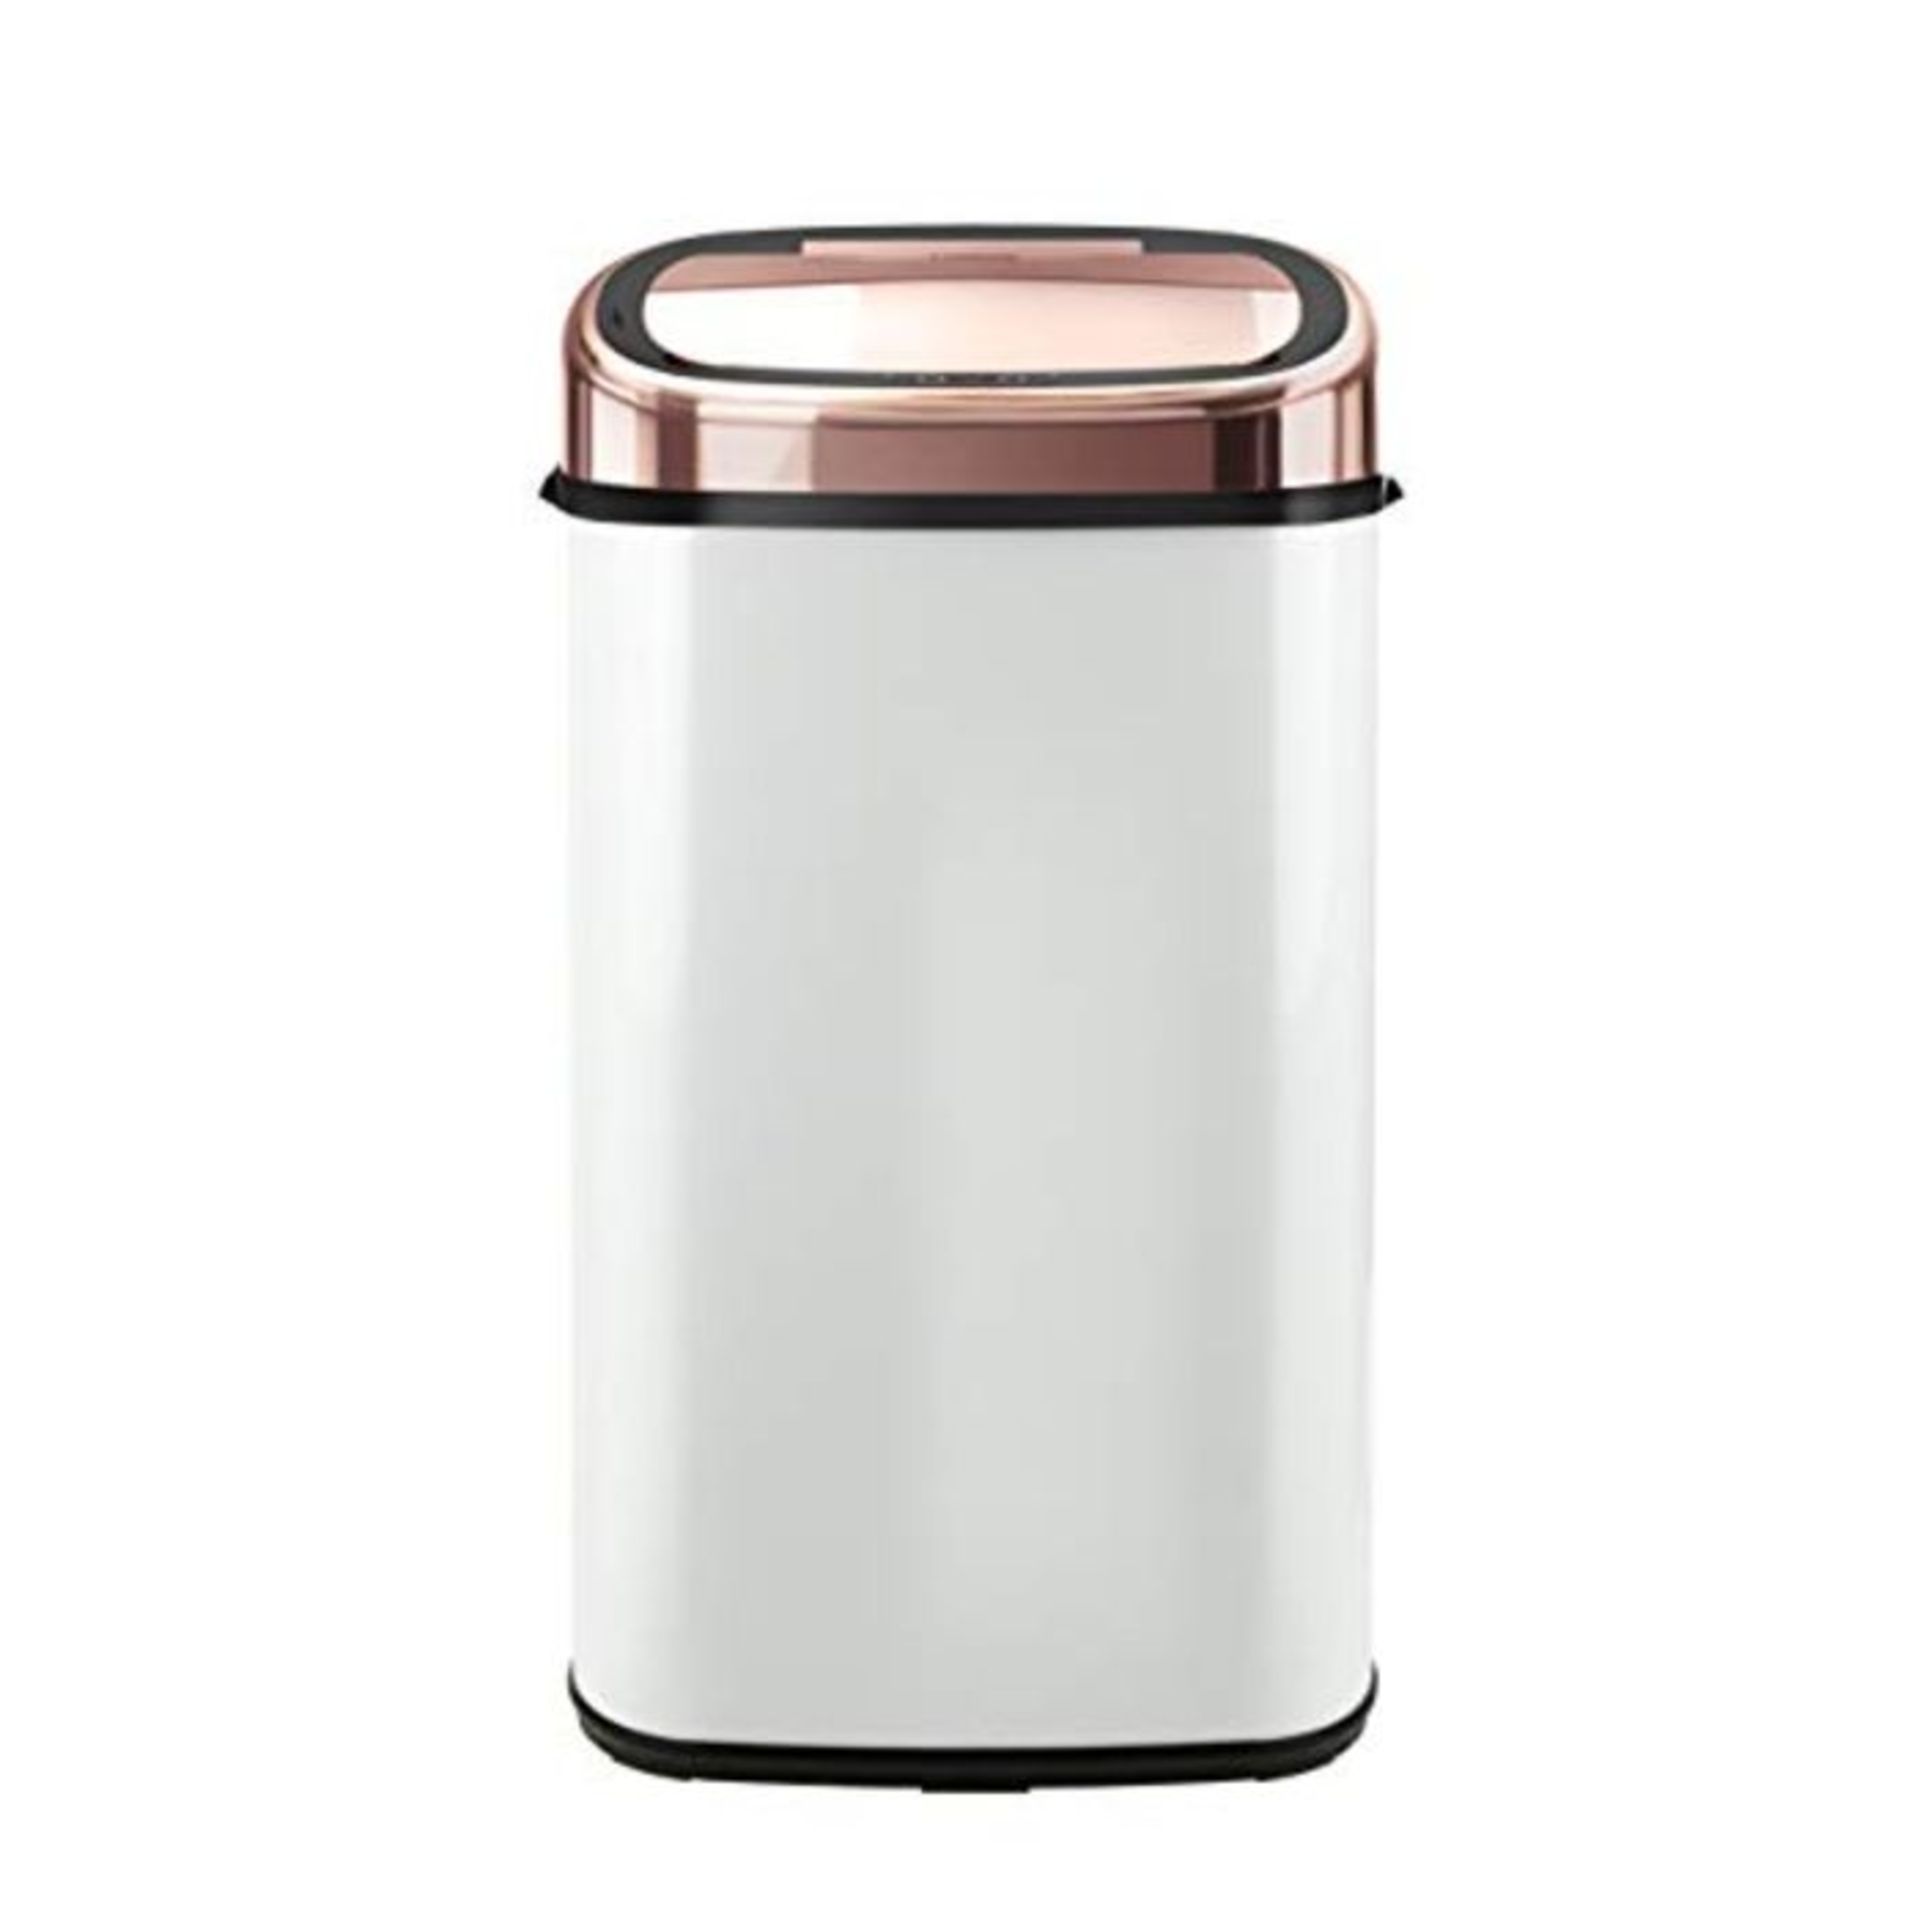 RRP £74.00 Tower T80904RW Kitchen Bin Sensor Lid, Touchless for Hygienic Waste Disposal, Infrared